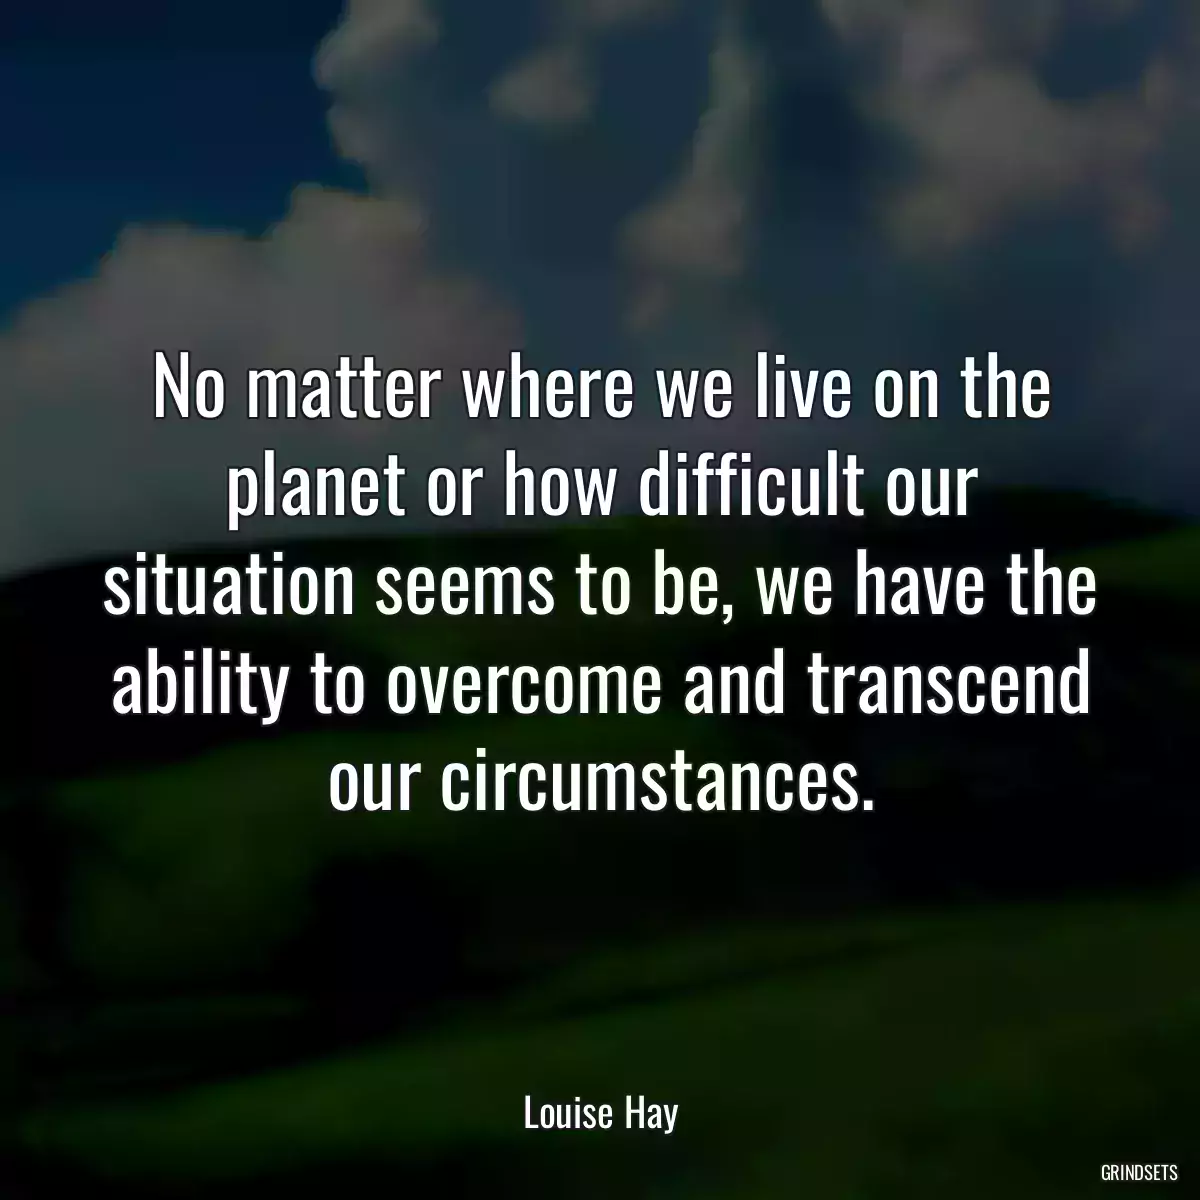 No matter where we live on the planet or how difficult our situation seems to be, we have the ability to overcome and transcend our circumstances.